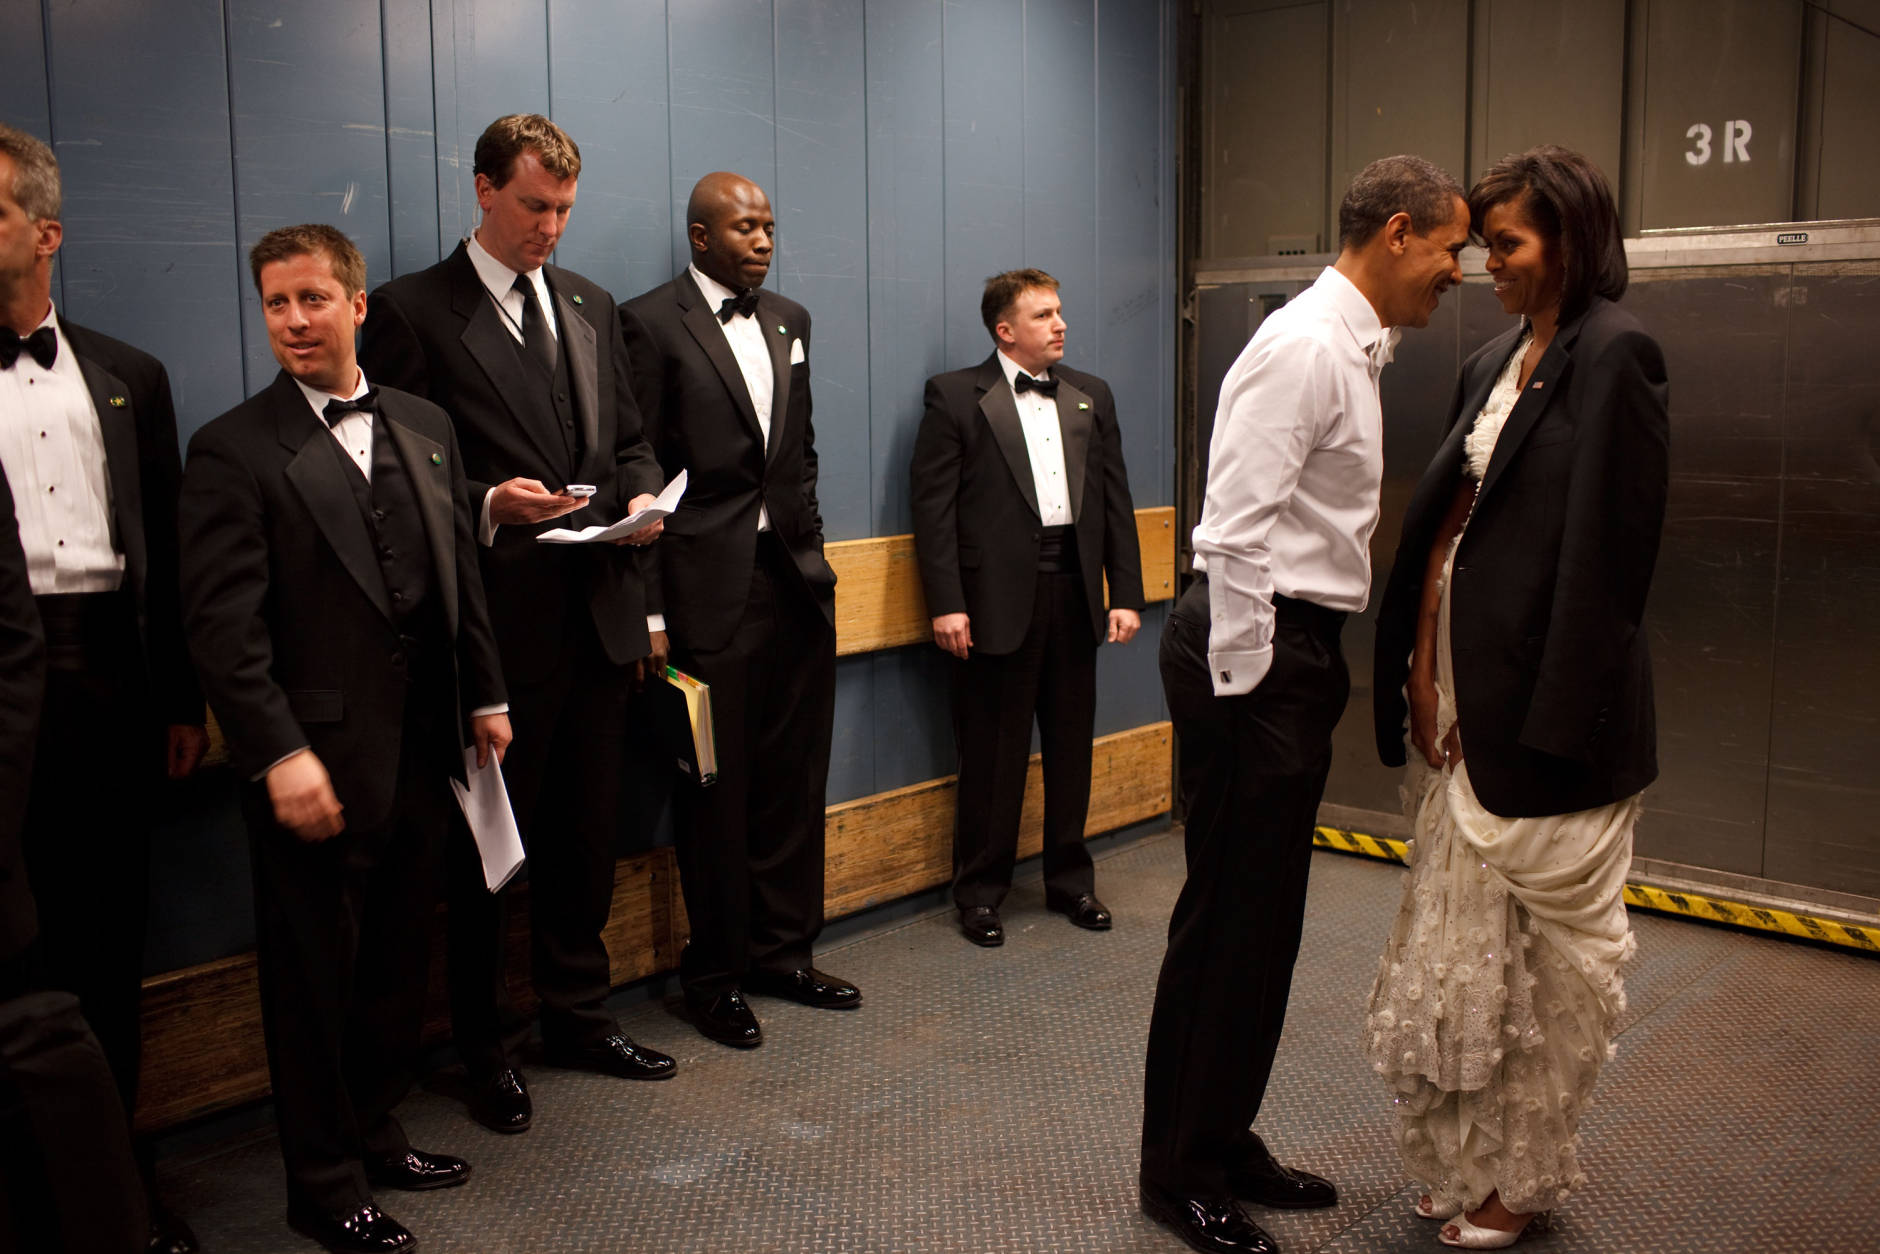 President Barack Obama and First Lady Michelle Obama share a private moment in a freight elevator at an Inaugural Ball. Washington, D.C. 1/20/09
Official White House Photo by Pete Souza